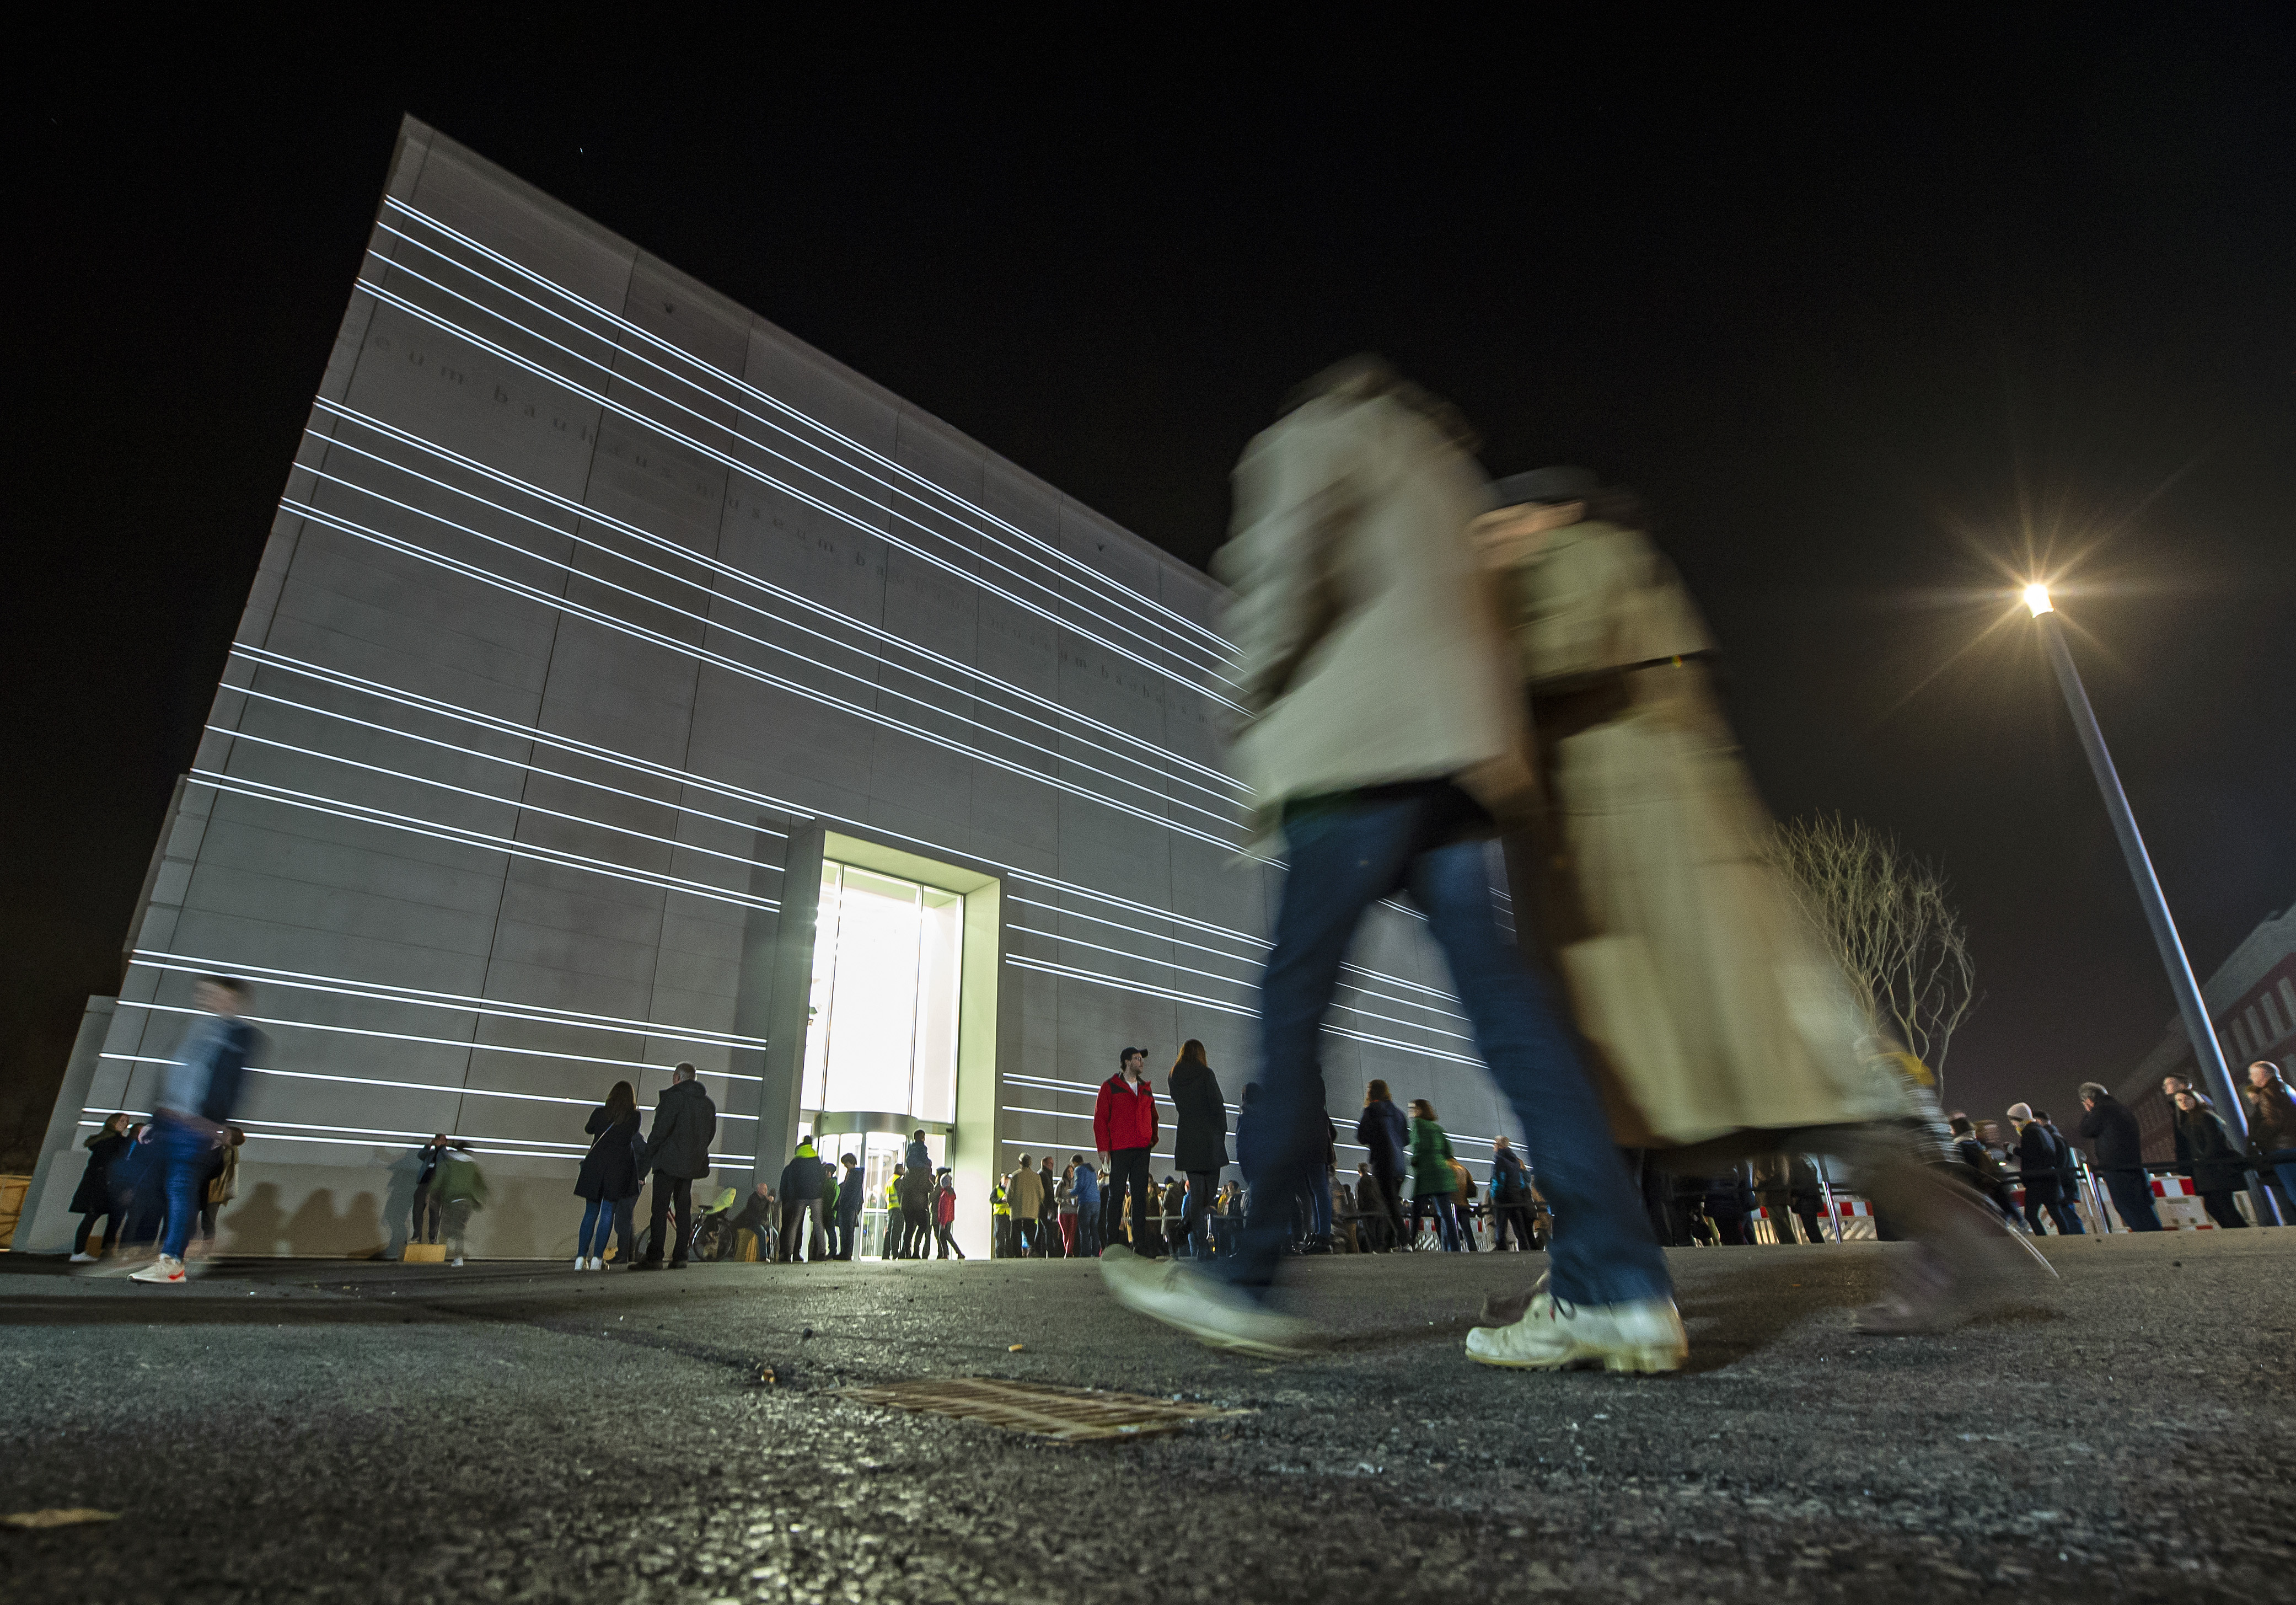 People walk in front of the new Bauhaus Museum building during a light installation performance at the official opening by the Klassik Stiftung Weimar in Weimar, Germany, Friday, April 5, 2019. The museum, designed by Berlin-based Heike Hanada, will focus on the early Bauhaus that was founded in Weimar in 1919 and stayed there until 1925. (AP Photo/Jens Meyer)